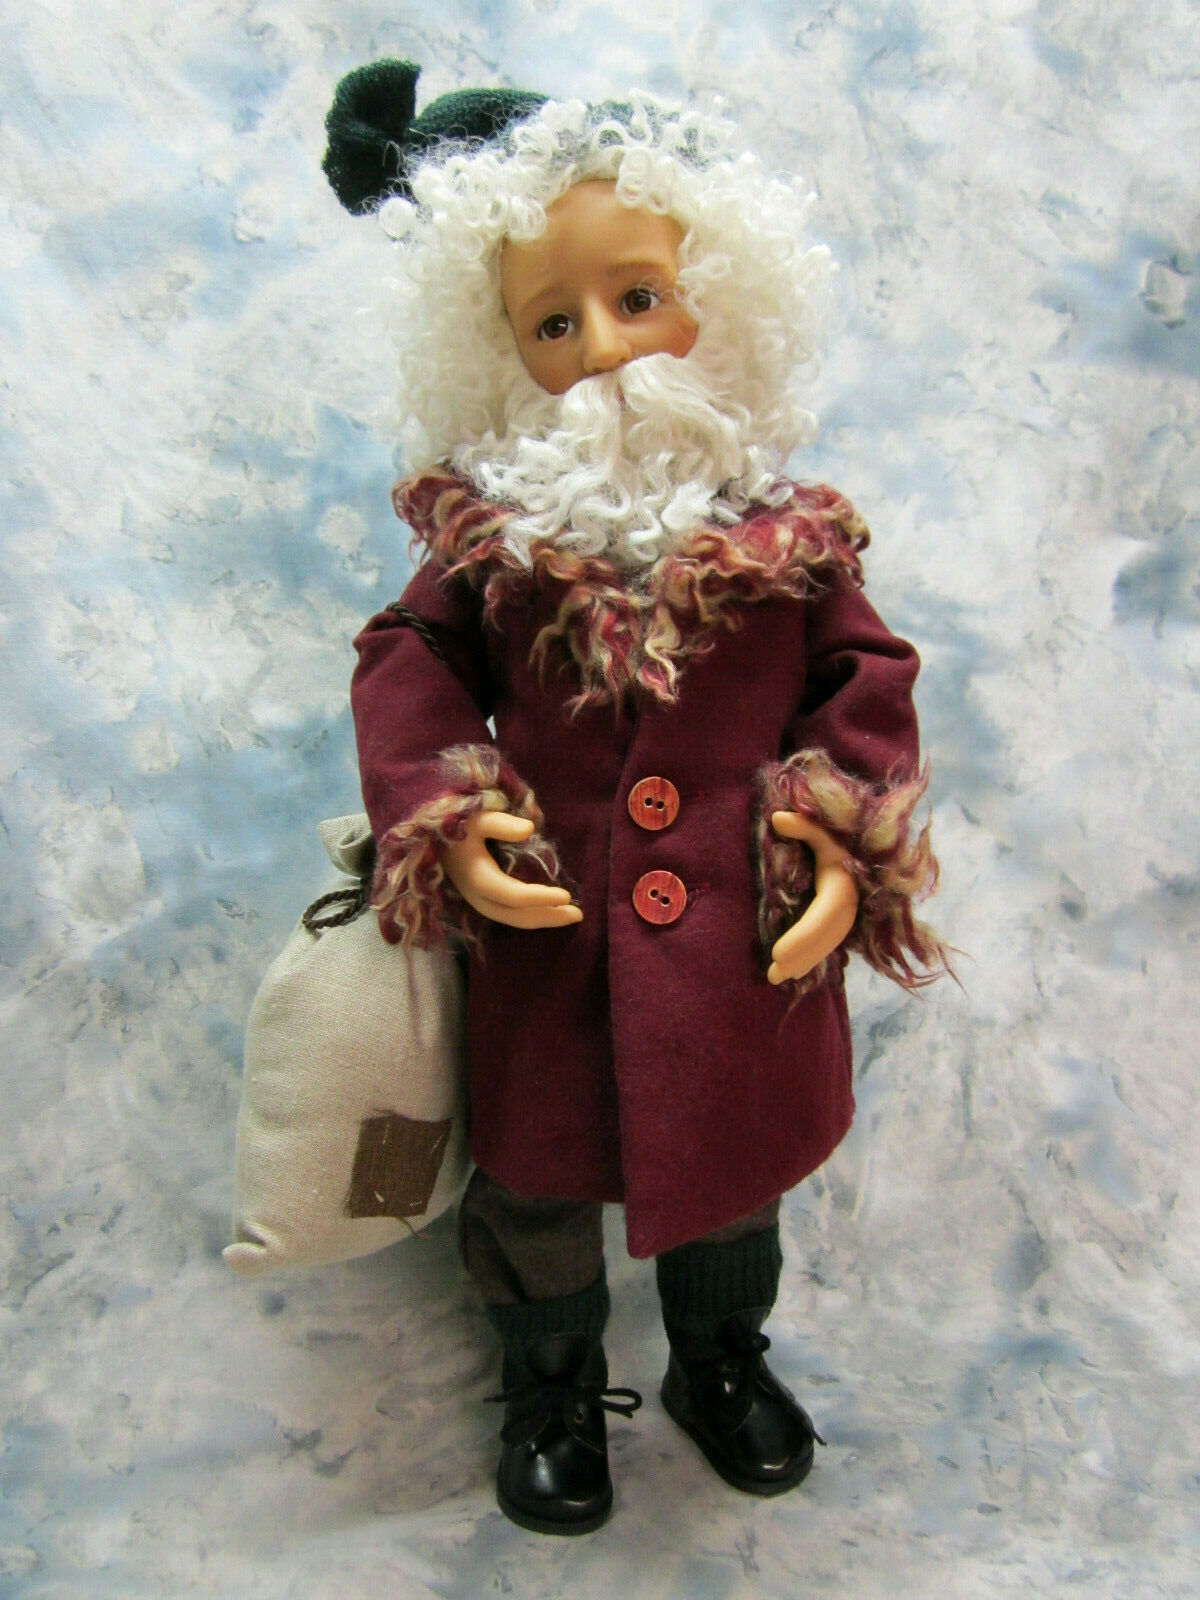 Collectible Gotz Handcrafted Vinyl Strung Doll Nikolaus Special Ed. From 2002